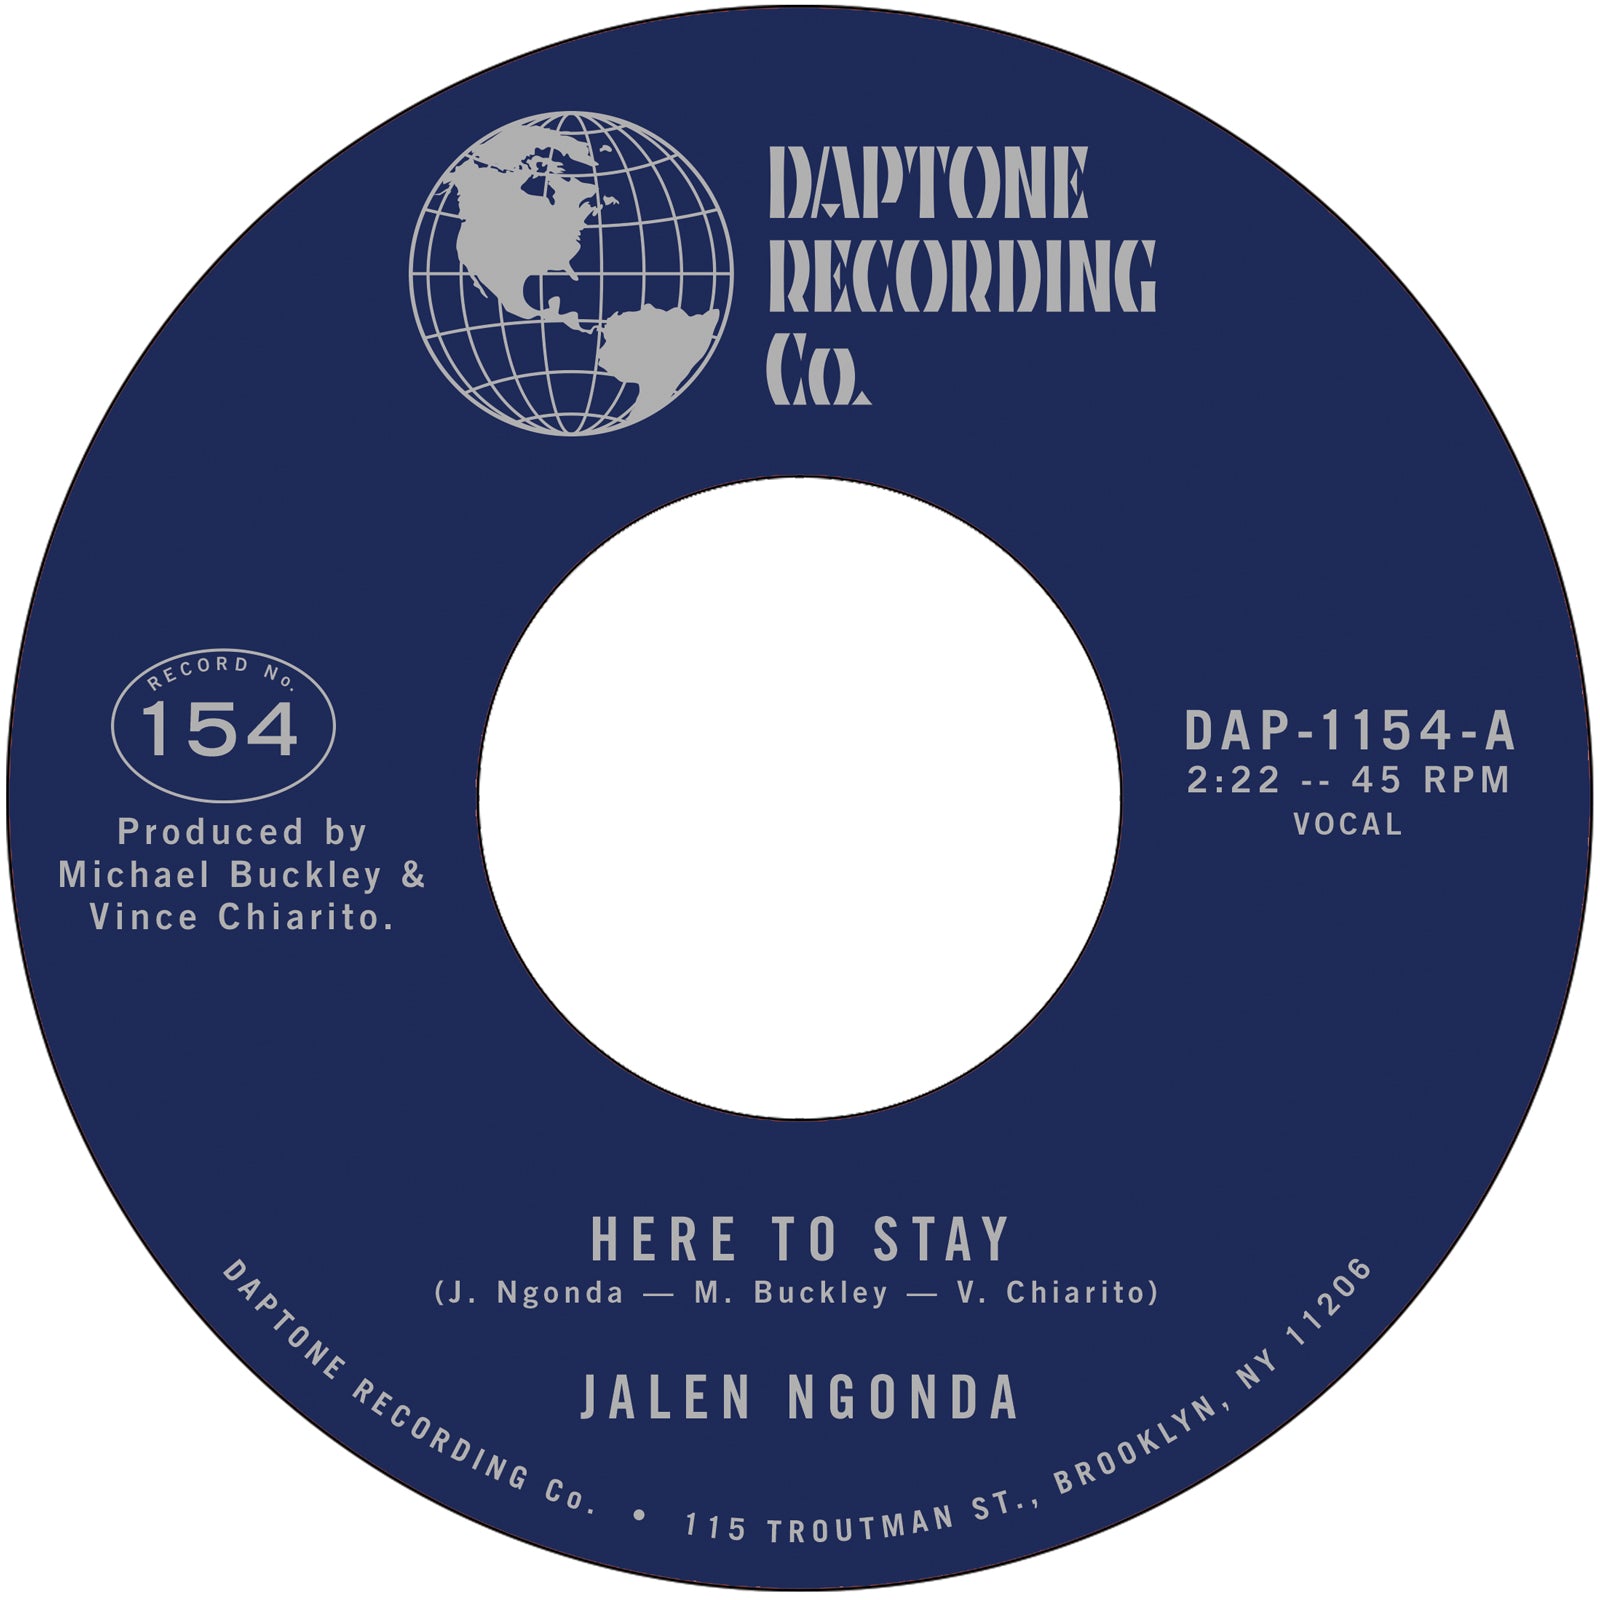 Jalen Ngonda "Here to Stay" / "If You Don't Want My Love" 45